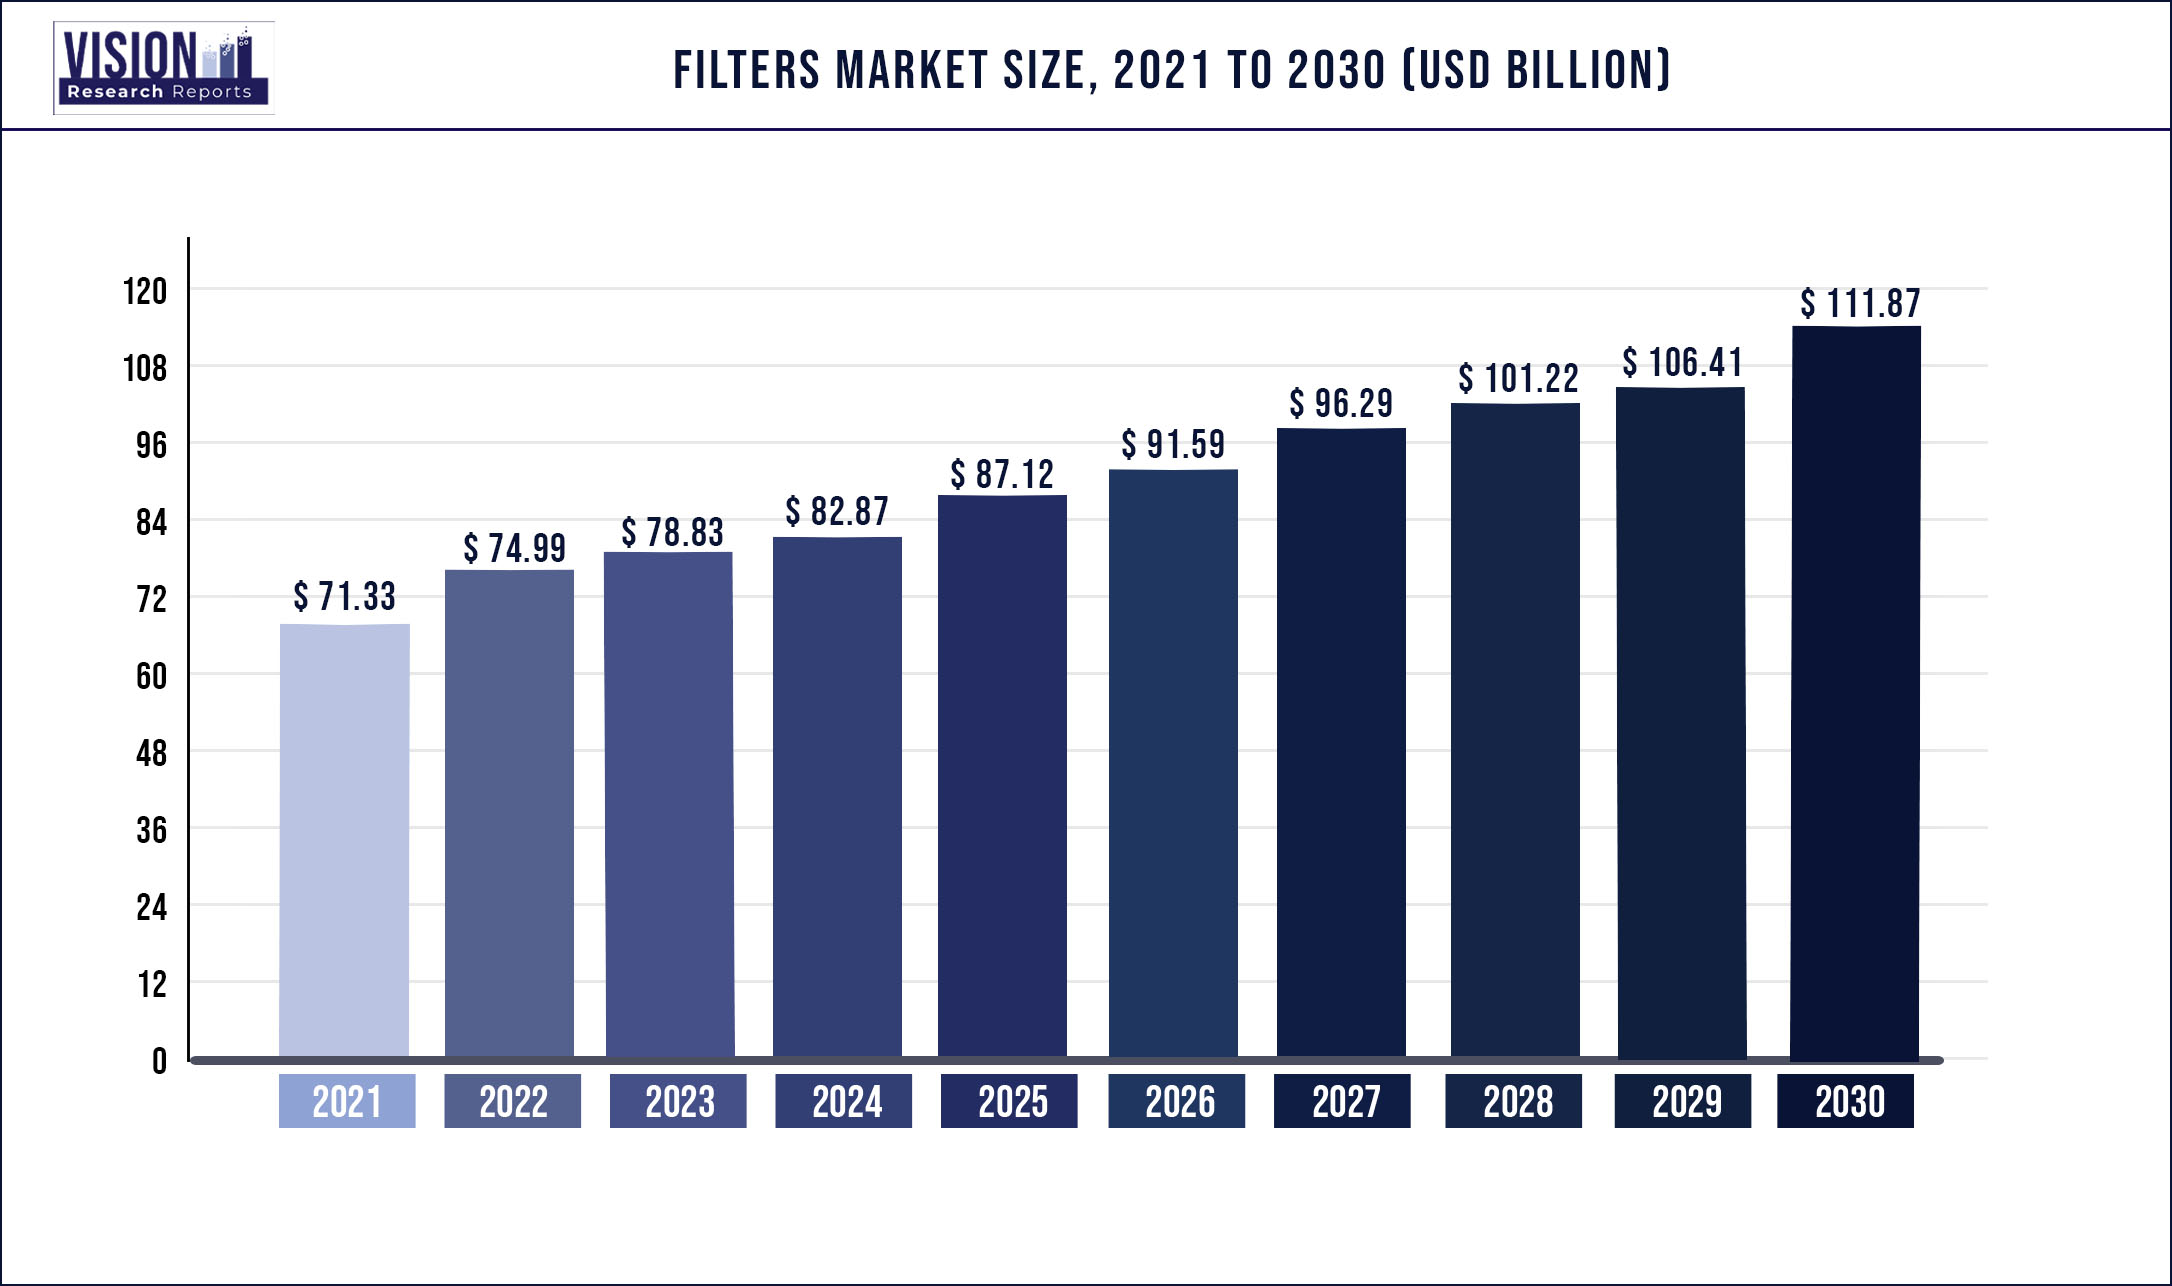 Filters Market Size 2021 to 2030